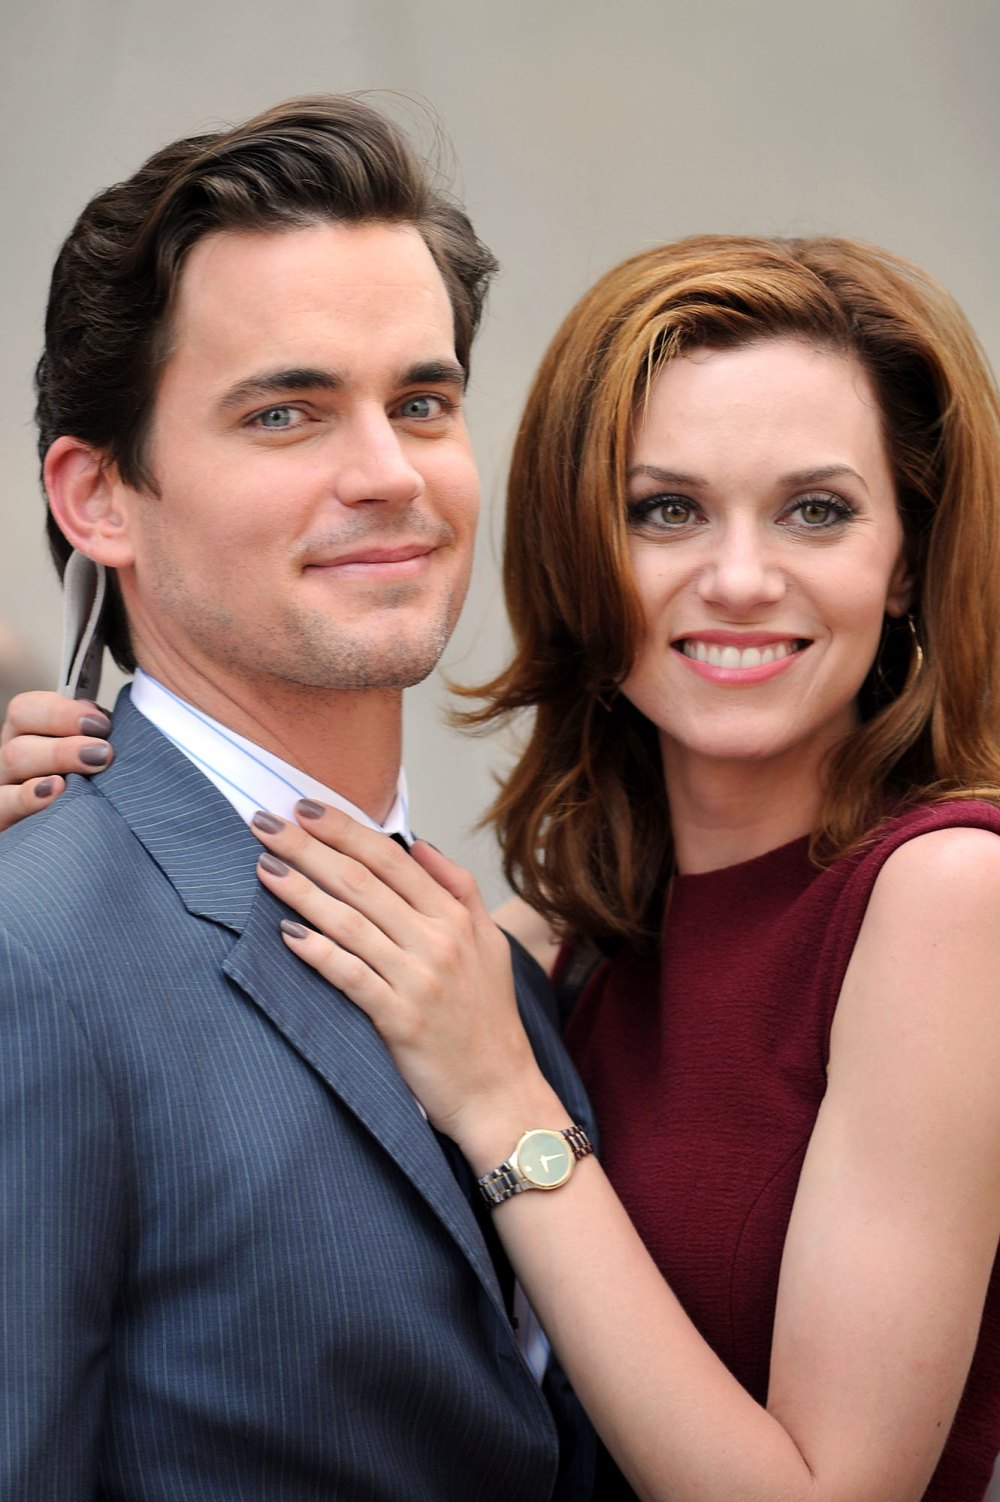 Matt Bomer and Hilarie Burton on the situation of 'White Collar' in 2011.